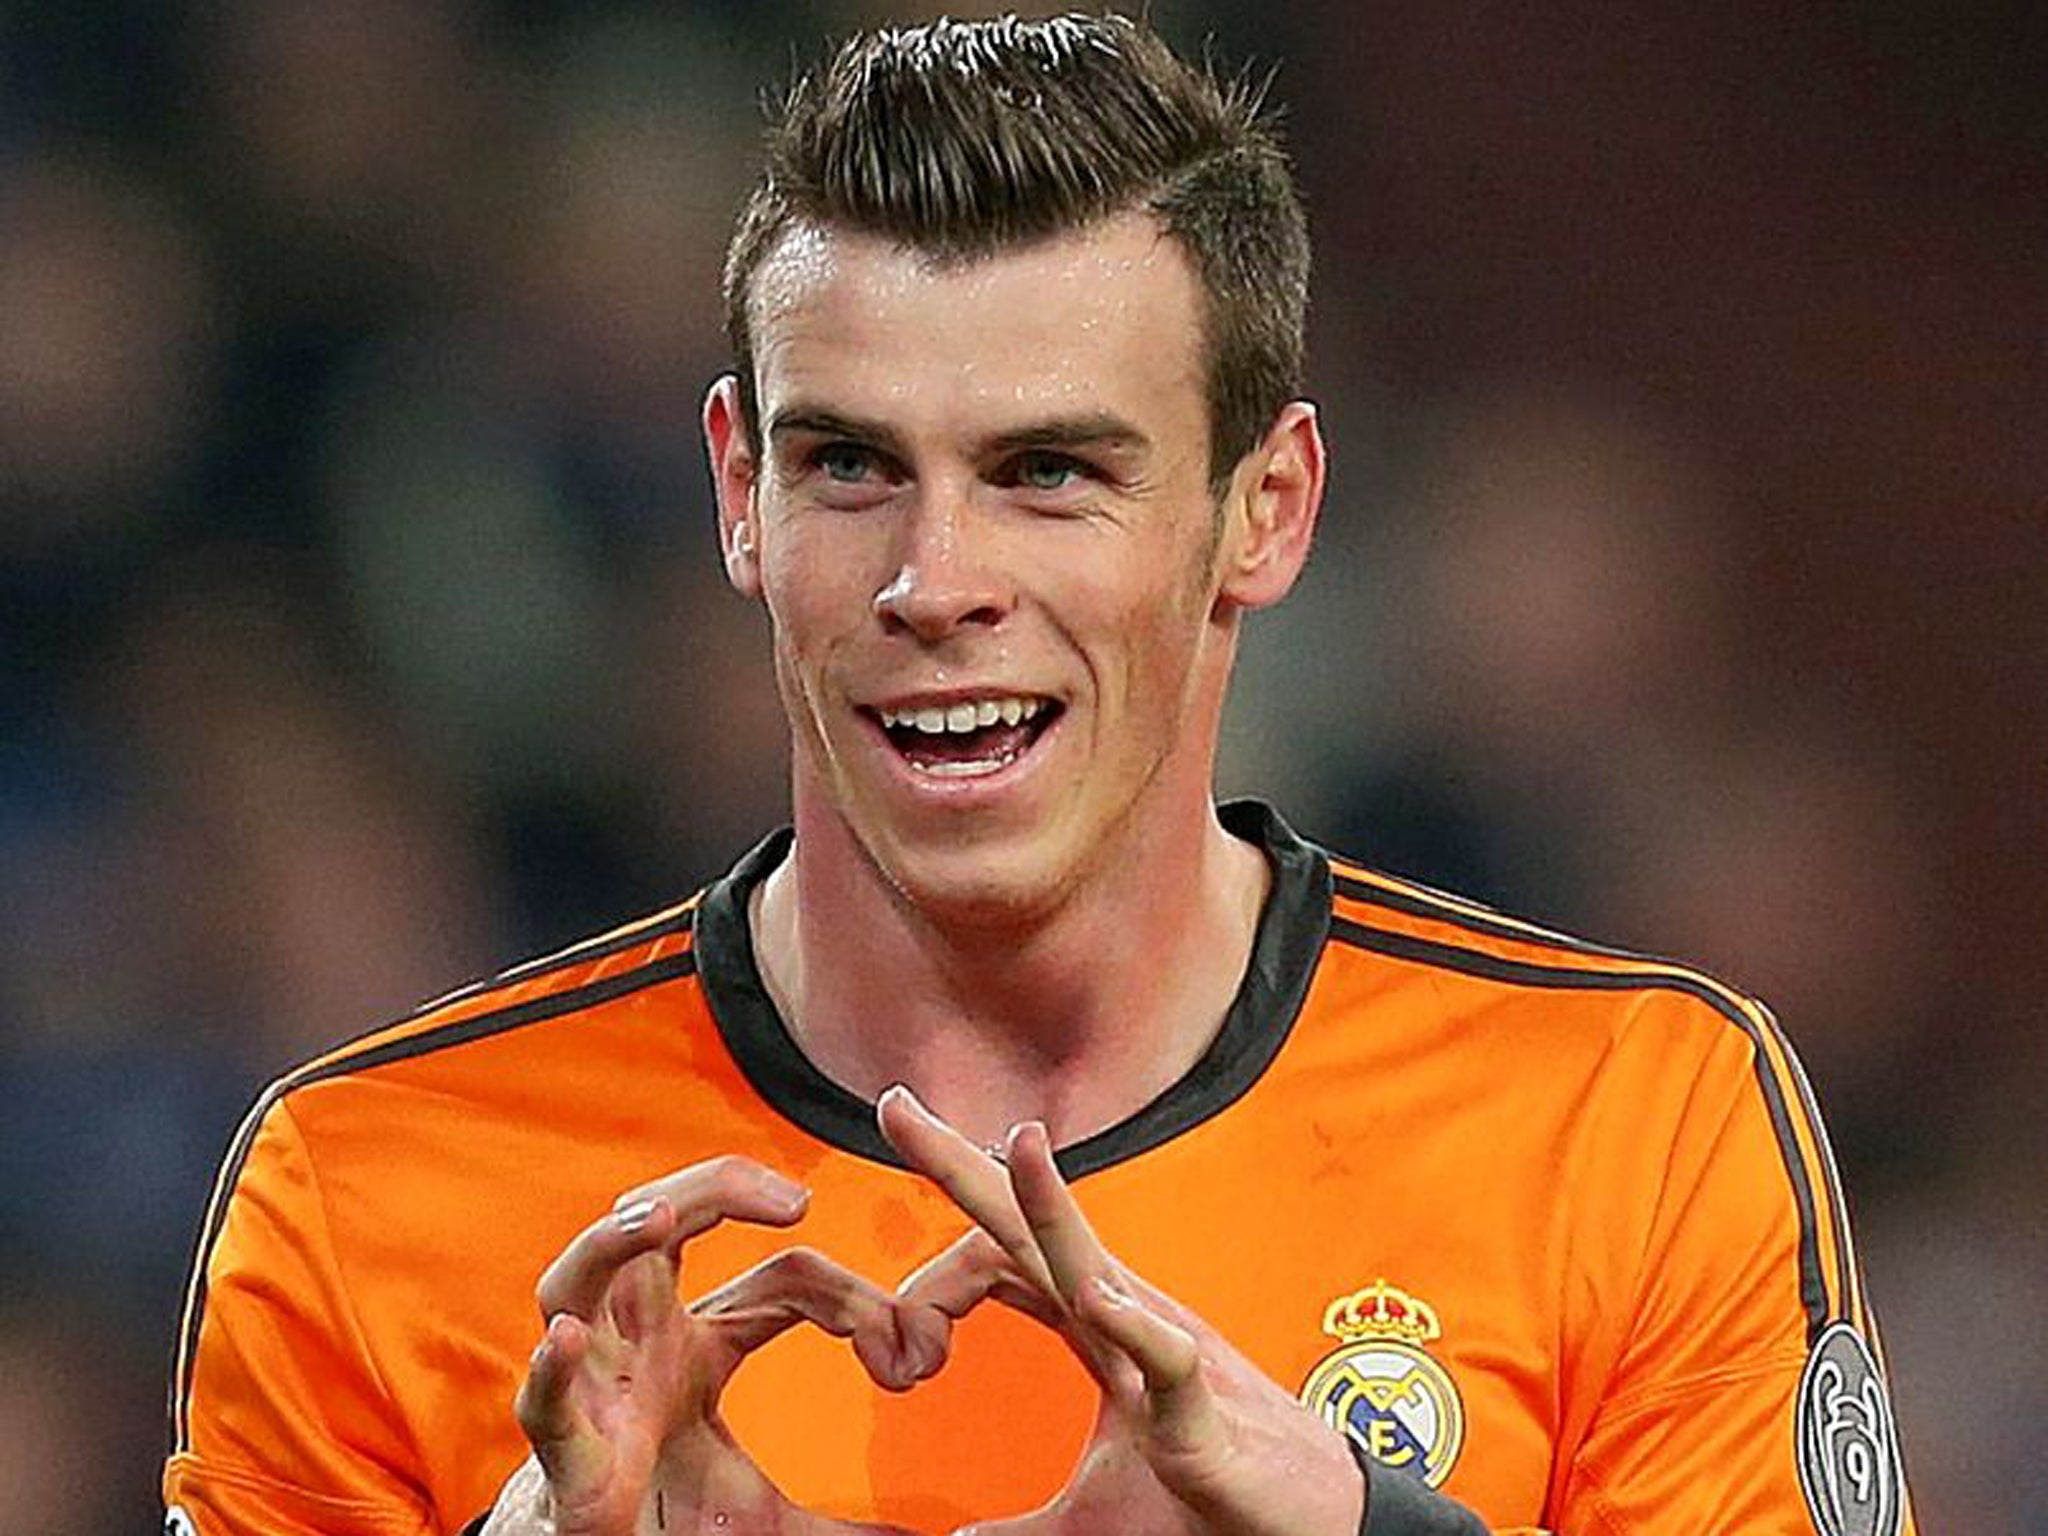 Gareth Bale's Celebration One of Relief - Last Word on Football